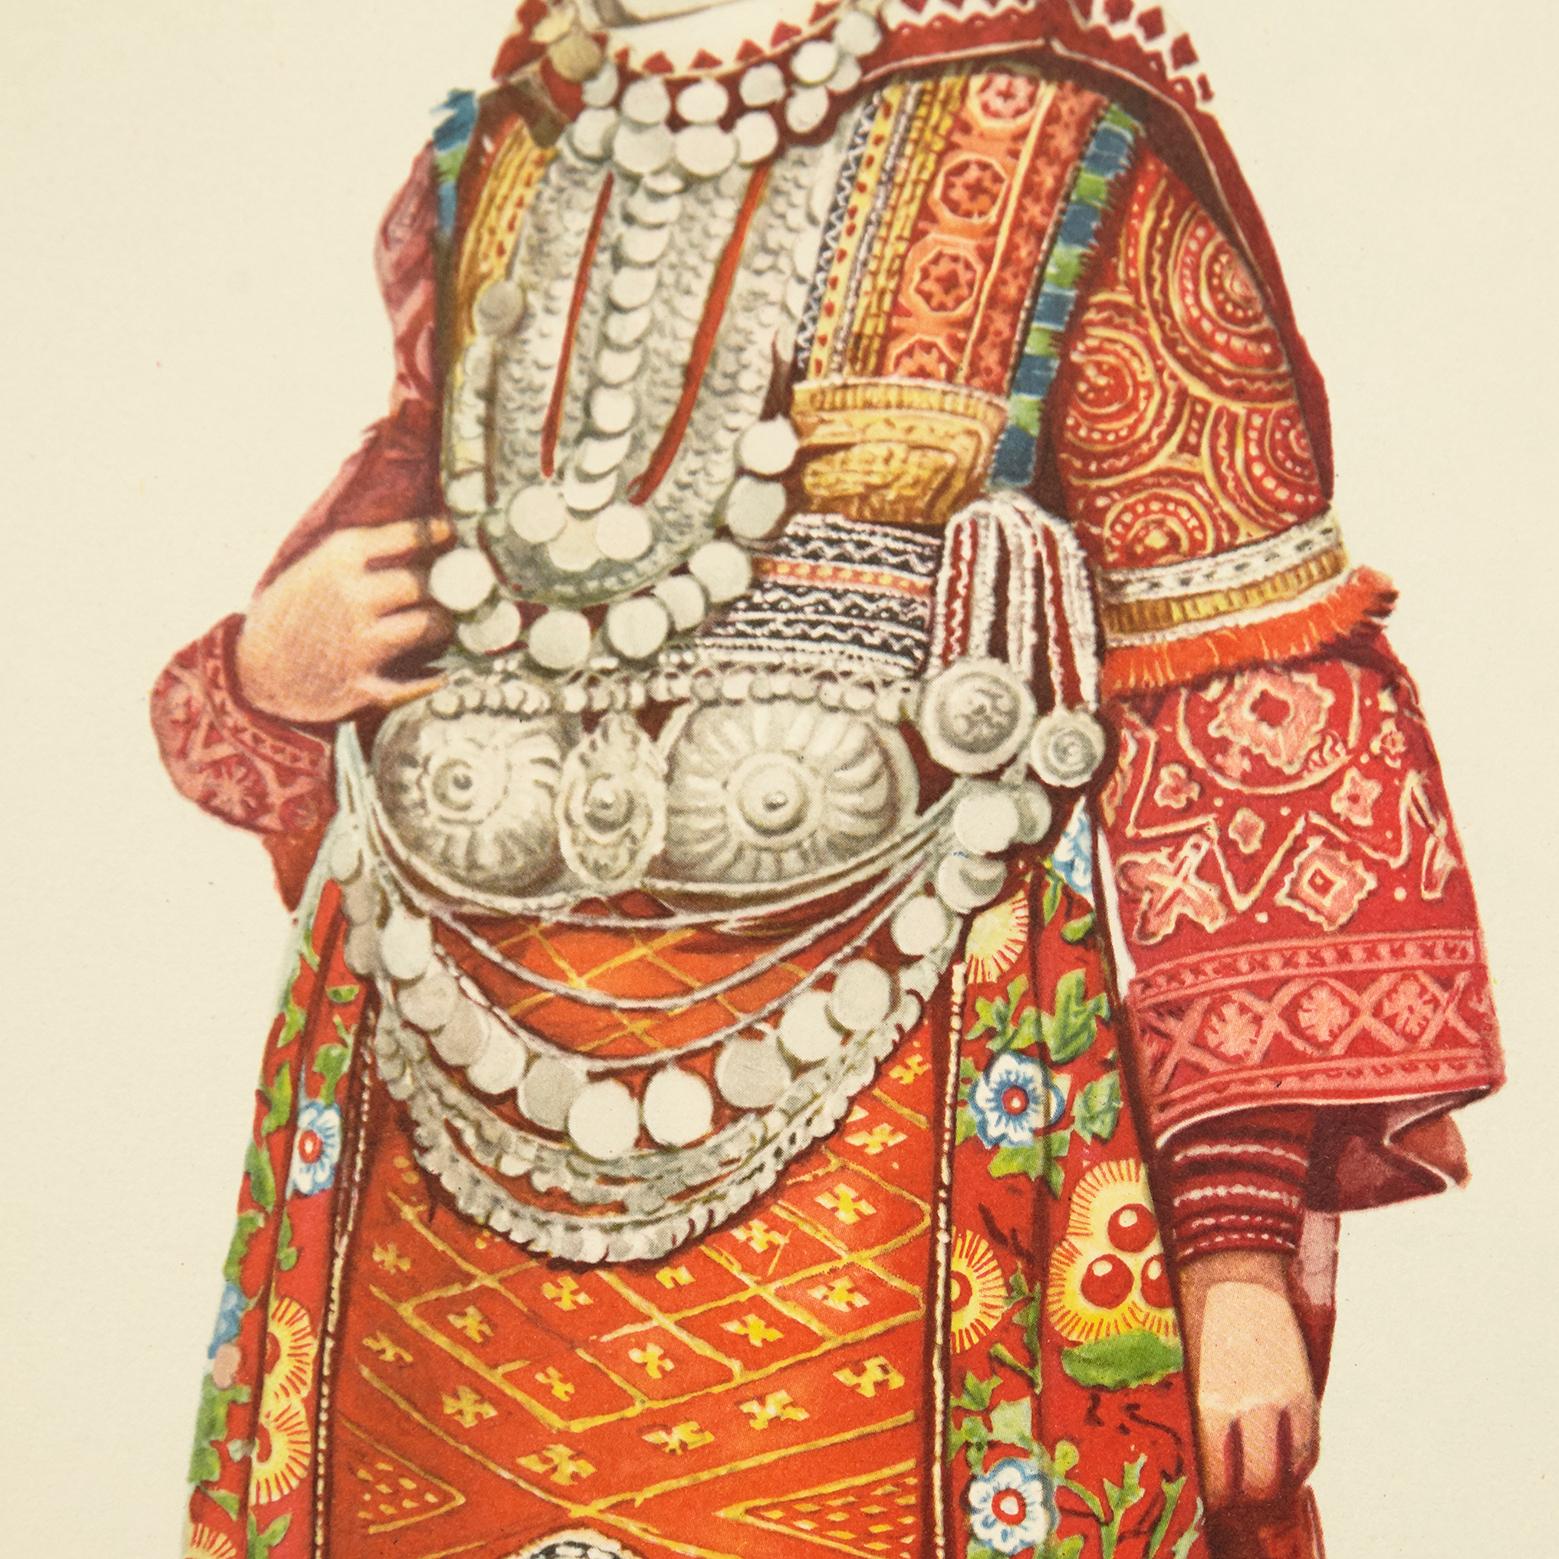 Macedonian National Dresses of Macedonia Illustrated Drawing in Plate, 1963